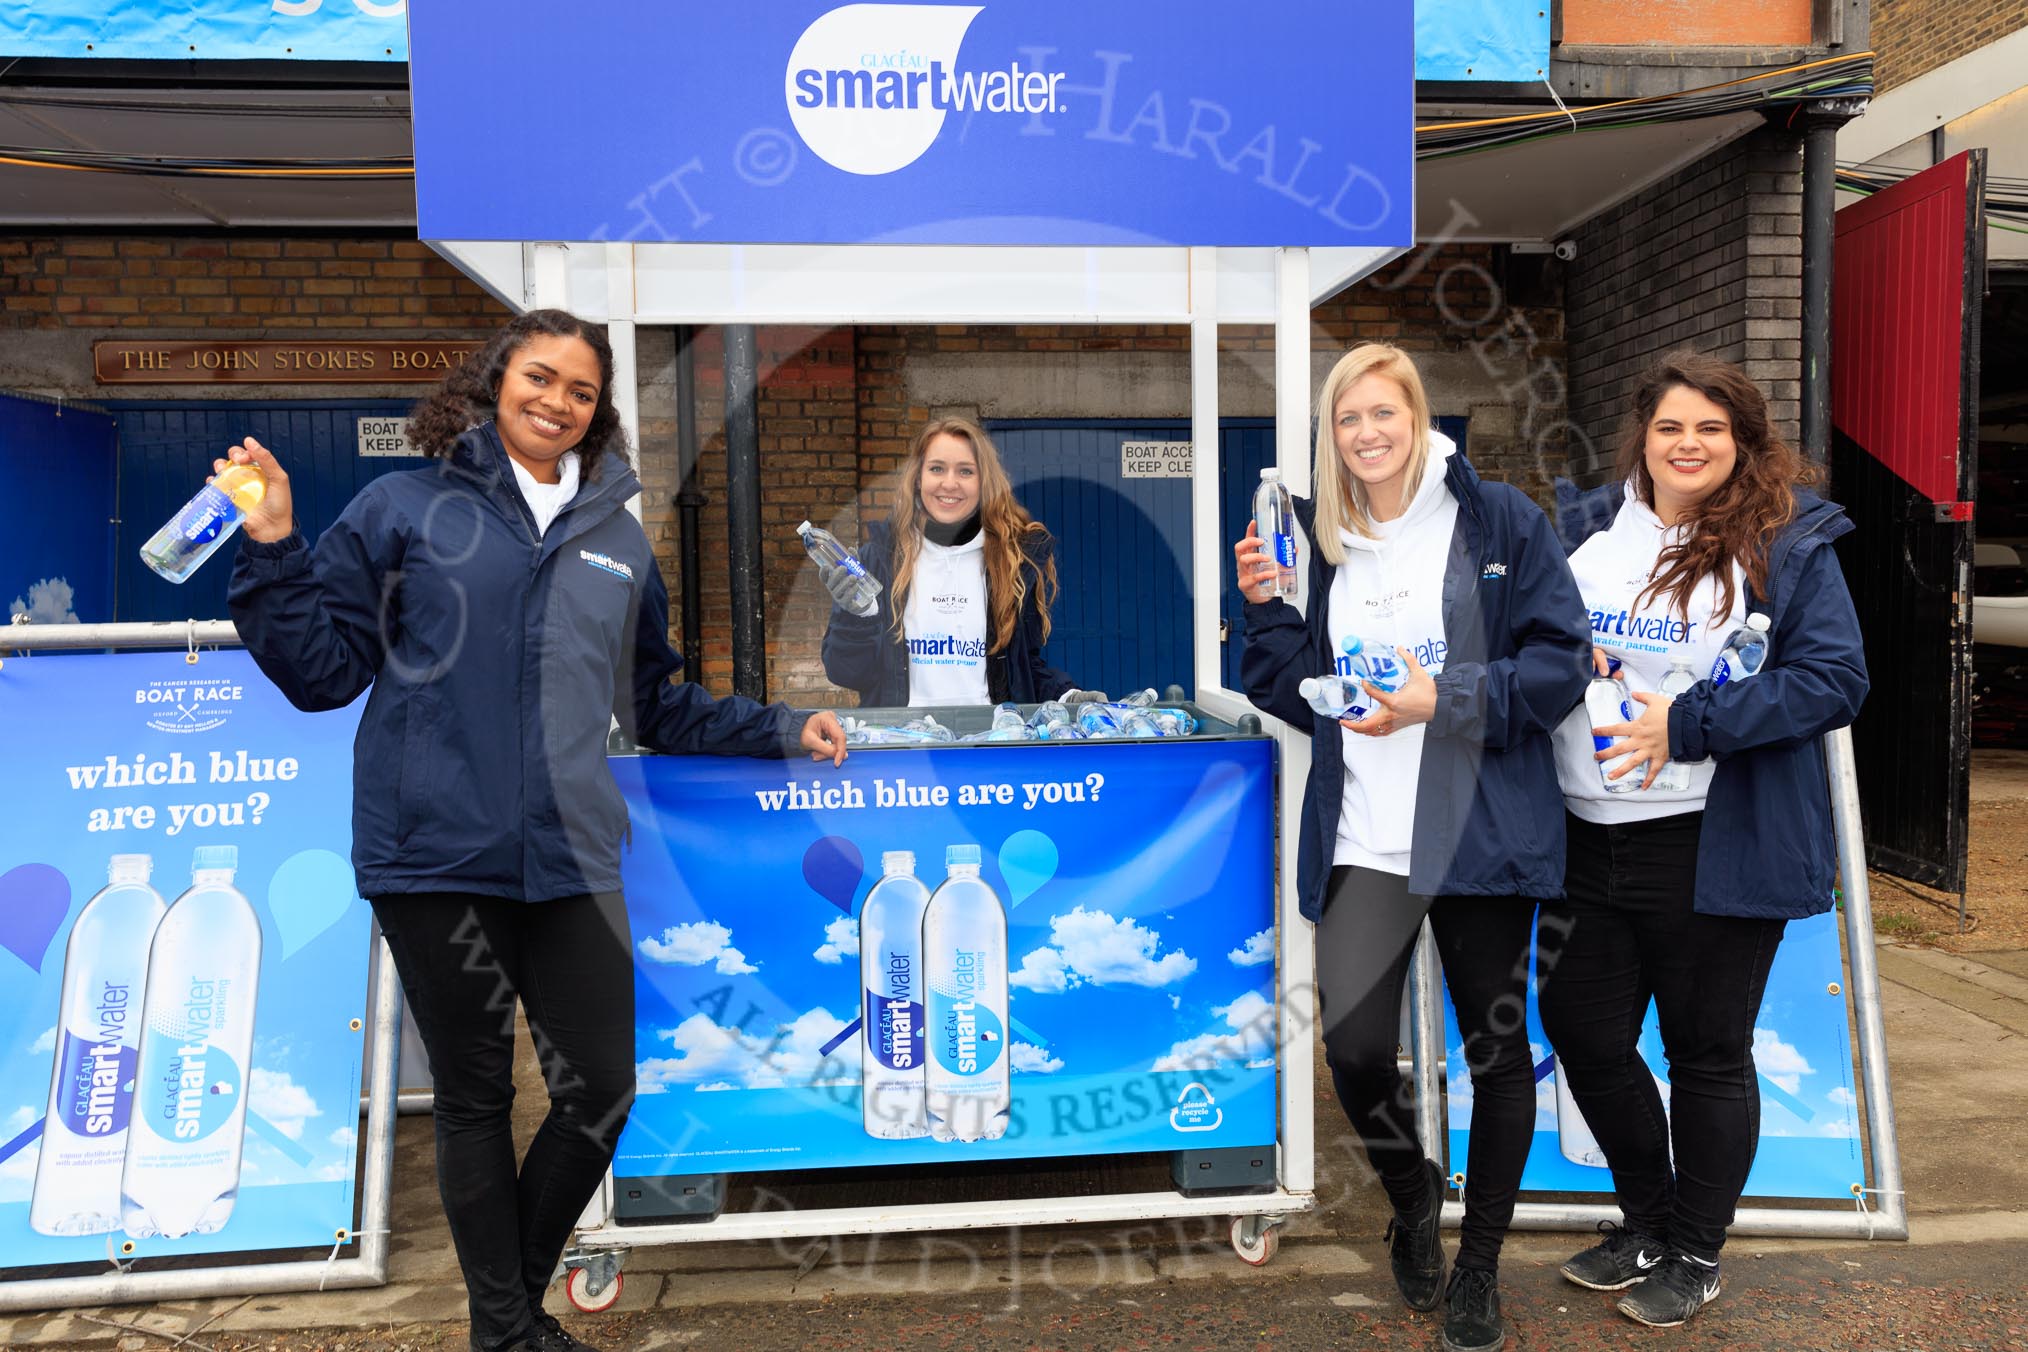 The Cancer Research UK Women's Boat Race 2018: SmartWater, one of the sponsors of teh Boat Race, with the "which blue are you" theme adopted for light blue/dark blue water bottles.
River Thames between Putney Bridge and Mortlake,
London SW15,

United Kingdom,
on 24 March 2018 at 12:59, image #1